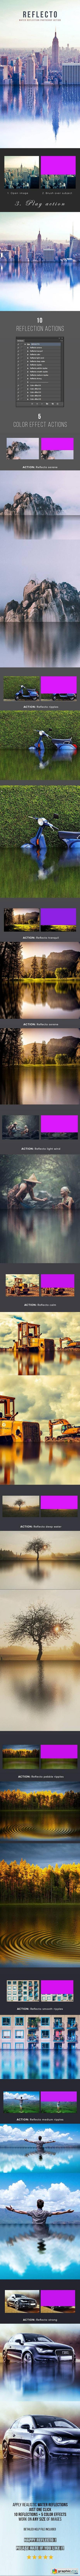 10-in-1 Reflecto Photoshop Action